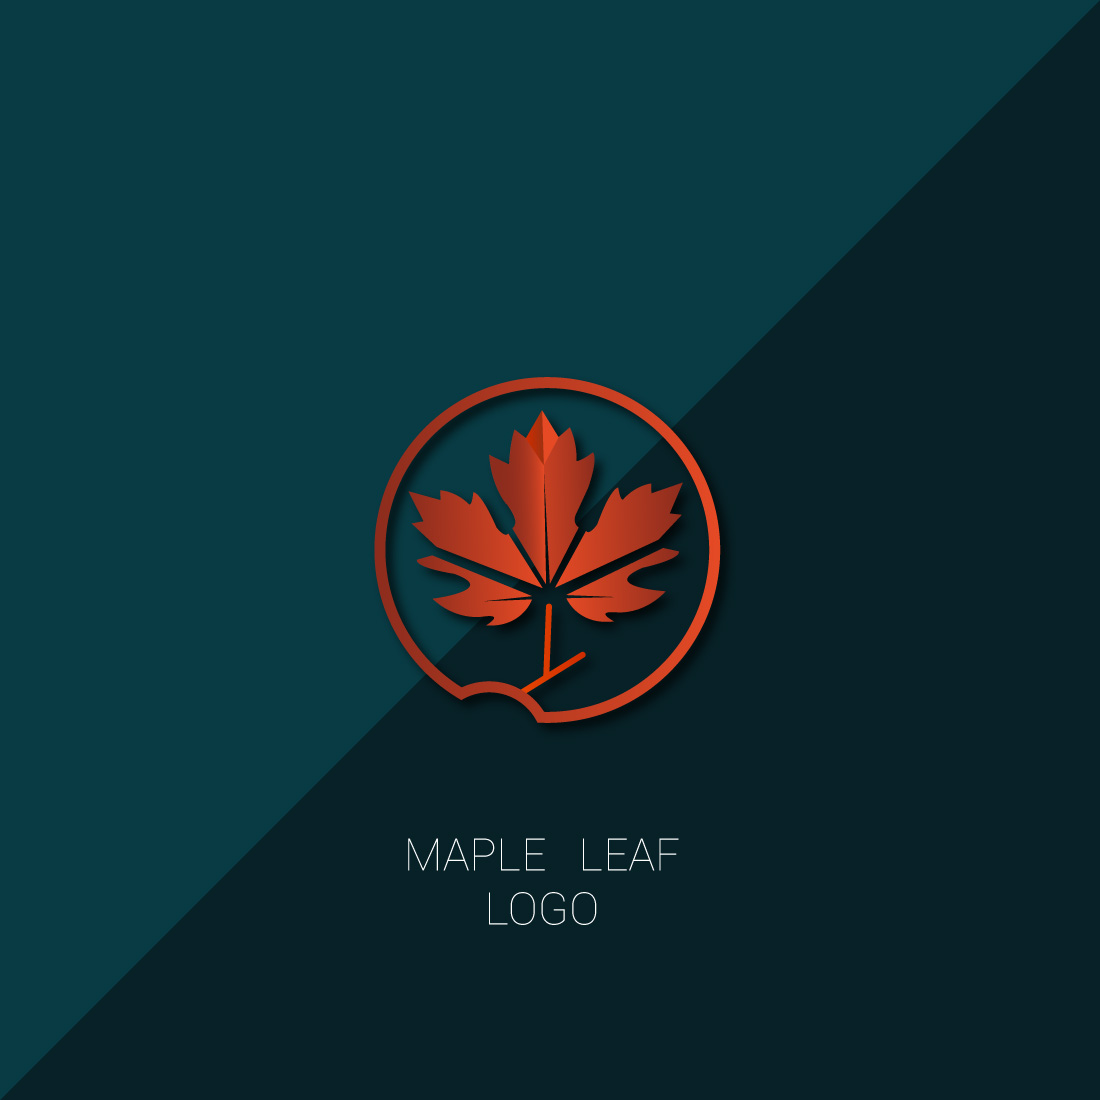 Maple leaf logo preview image.